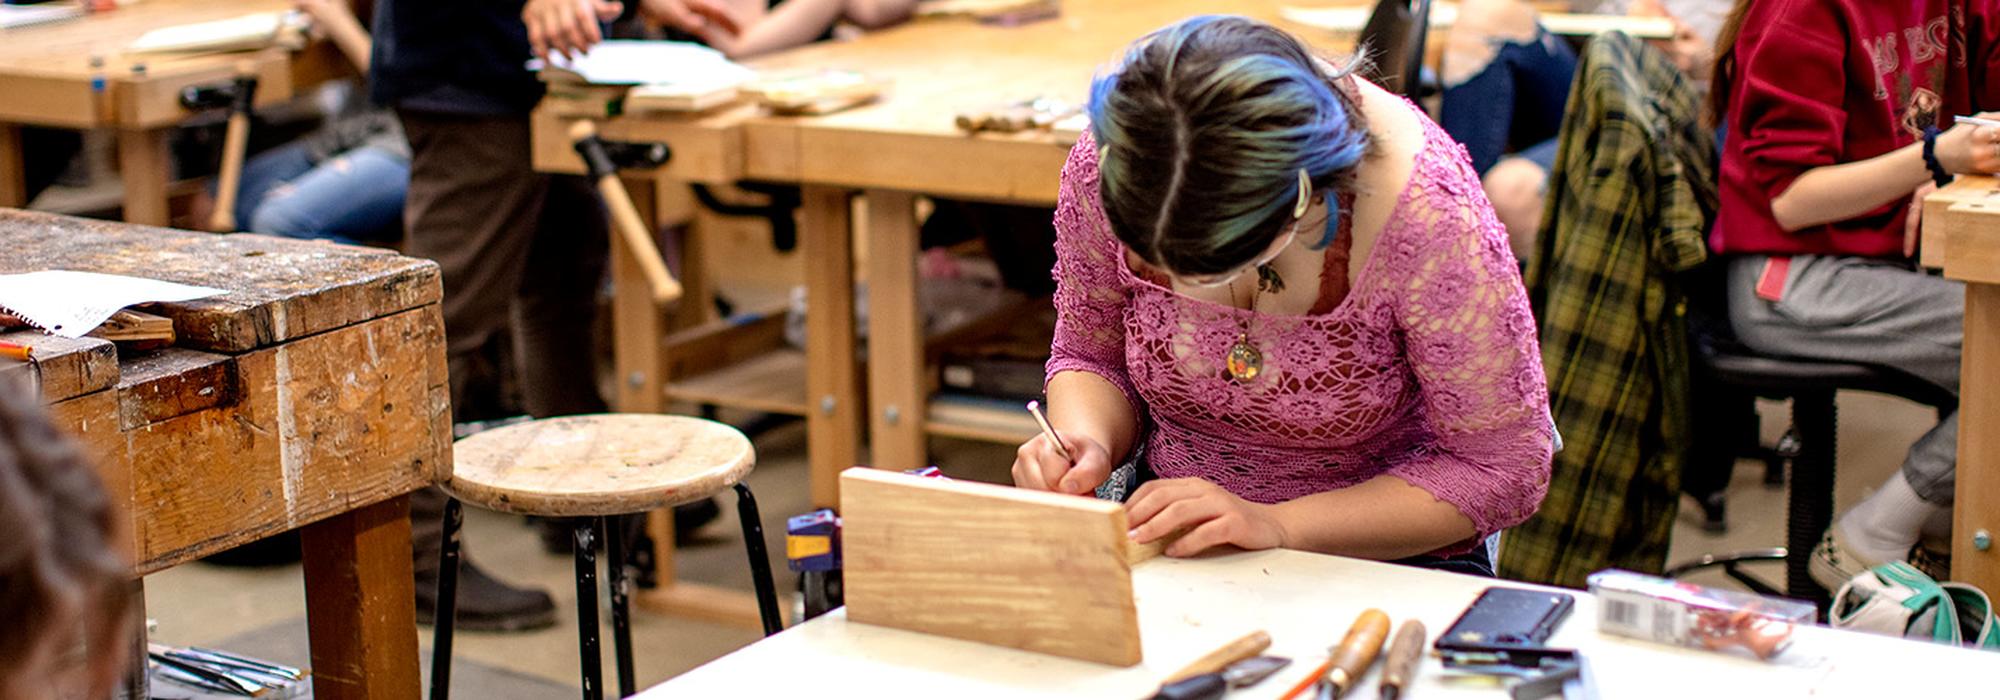 studio art class works on relief-carving wood